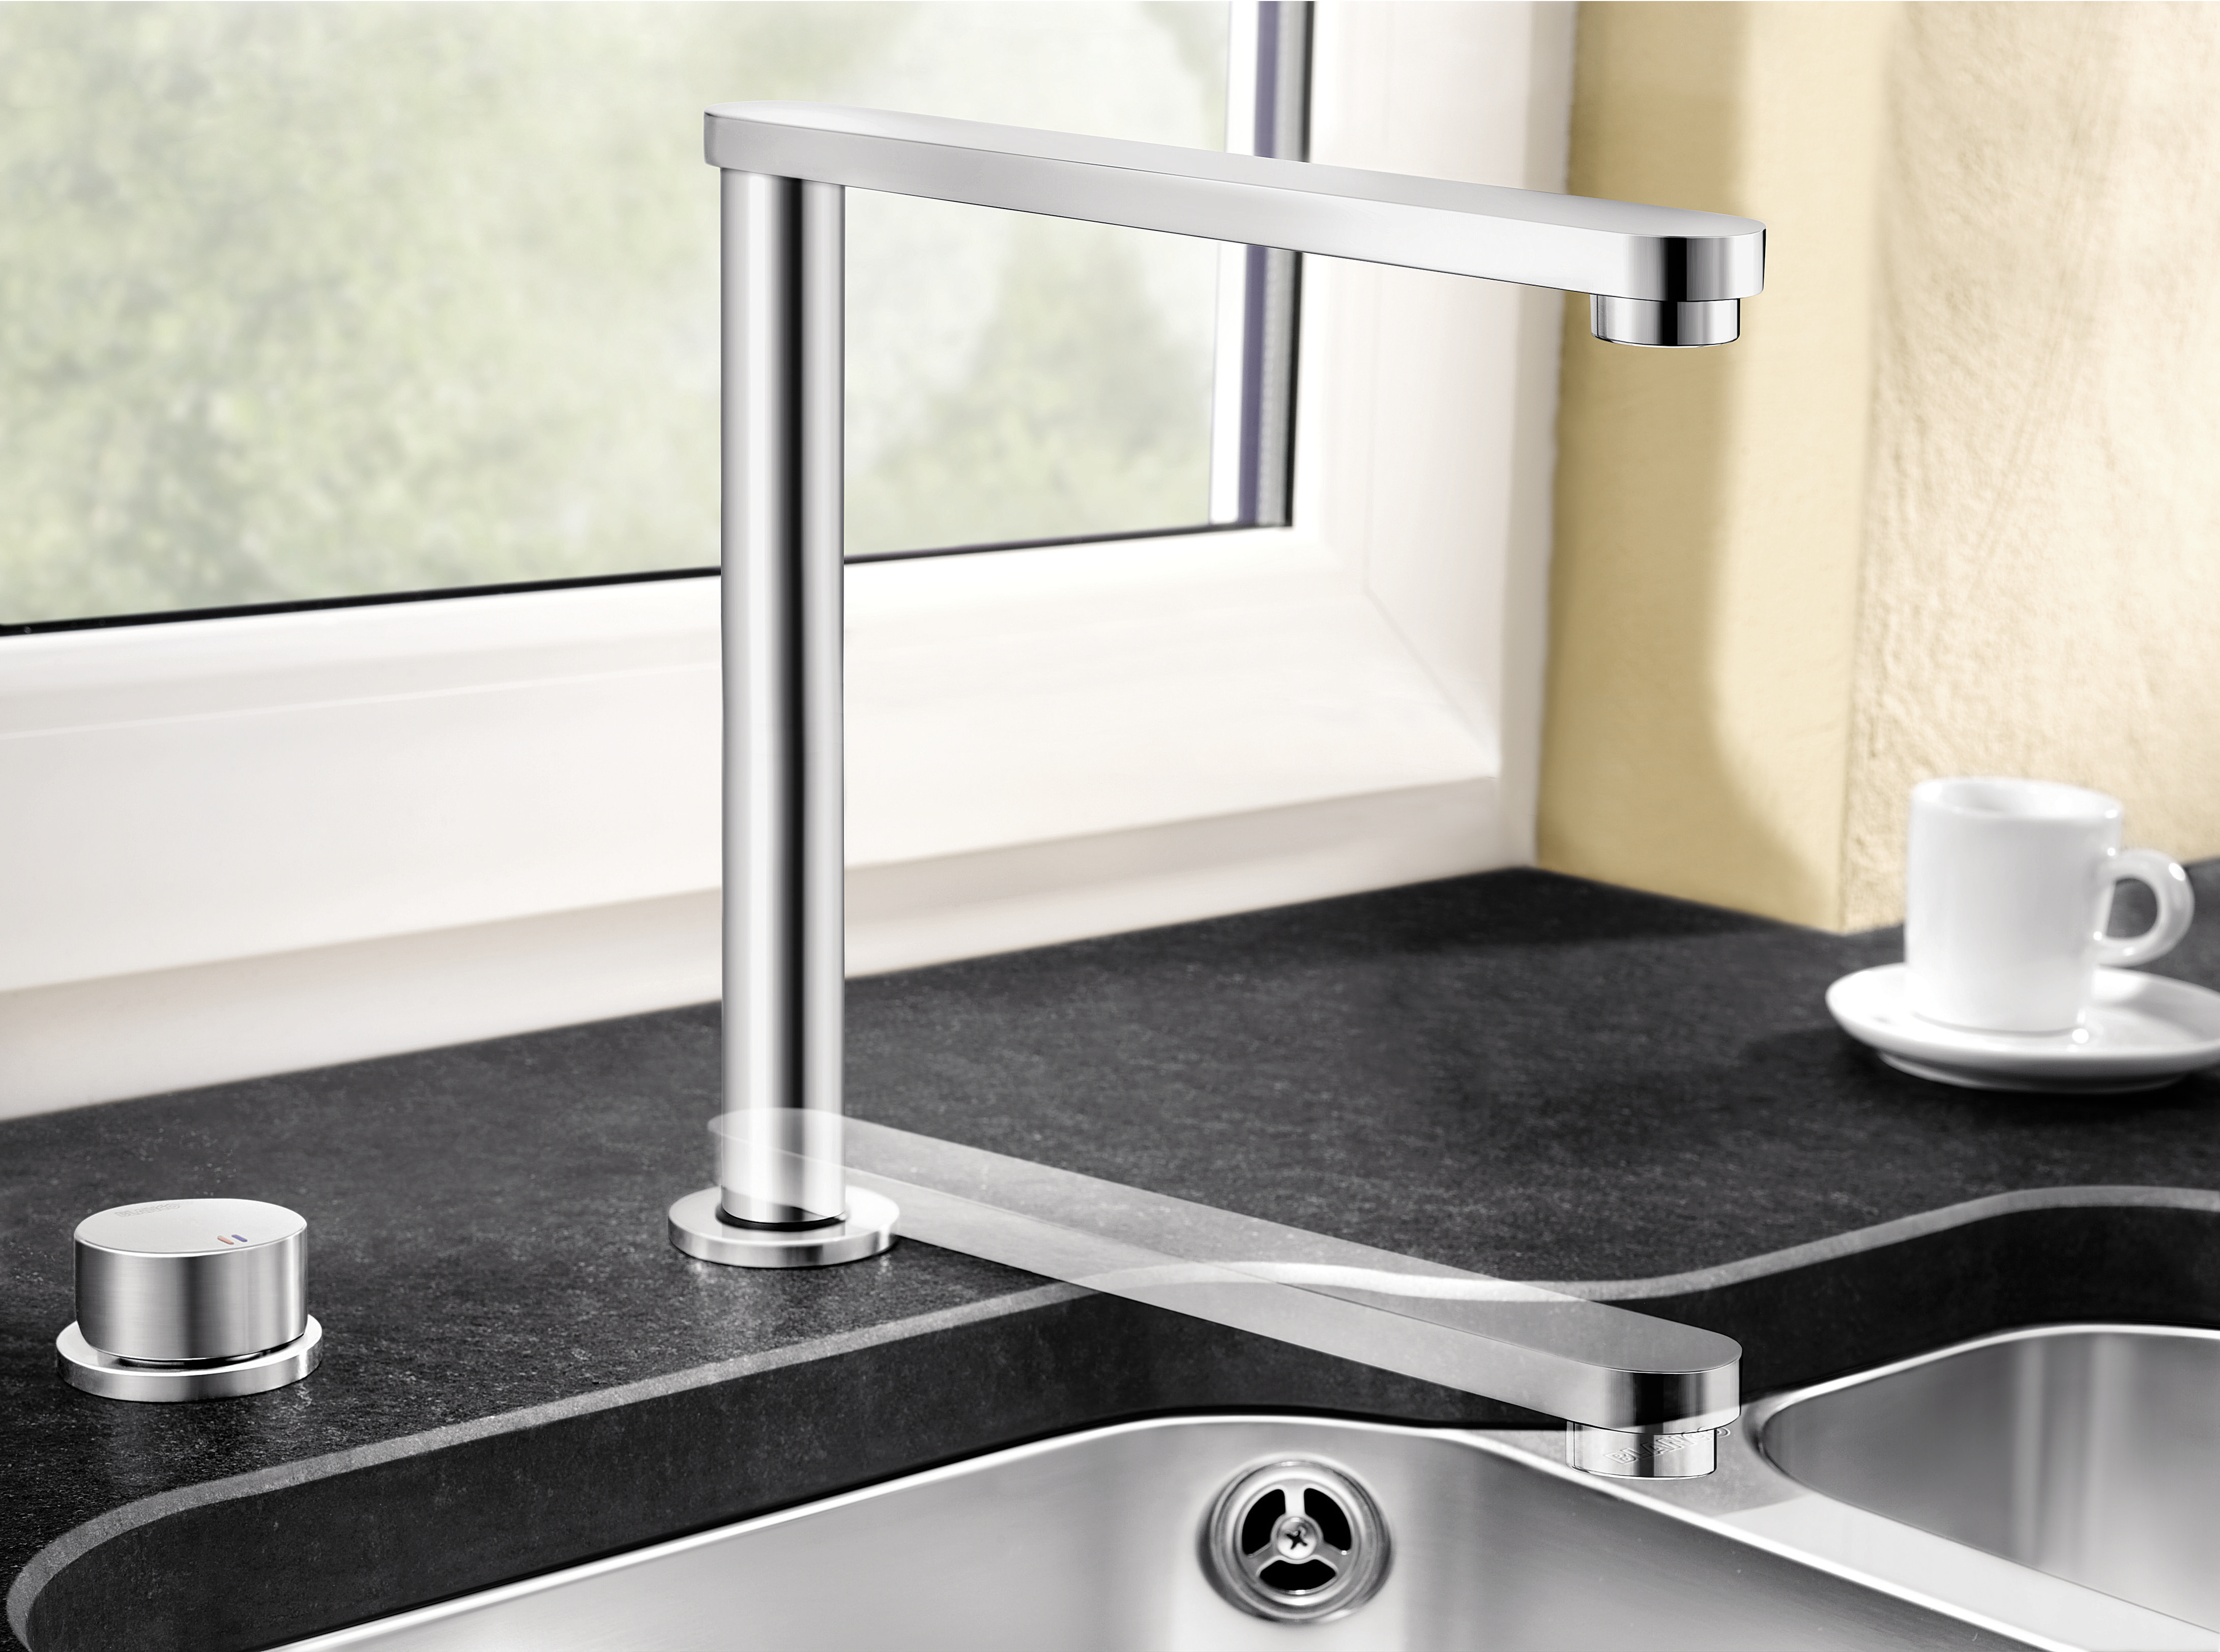 Stylish and practical: retractable taps give you space in an instant.